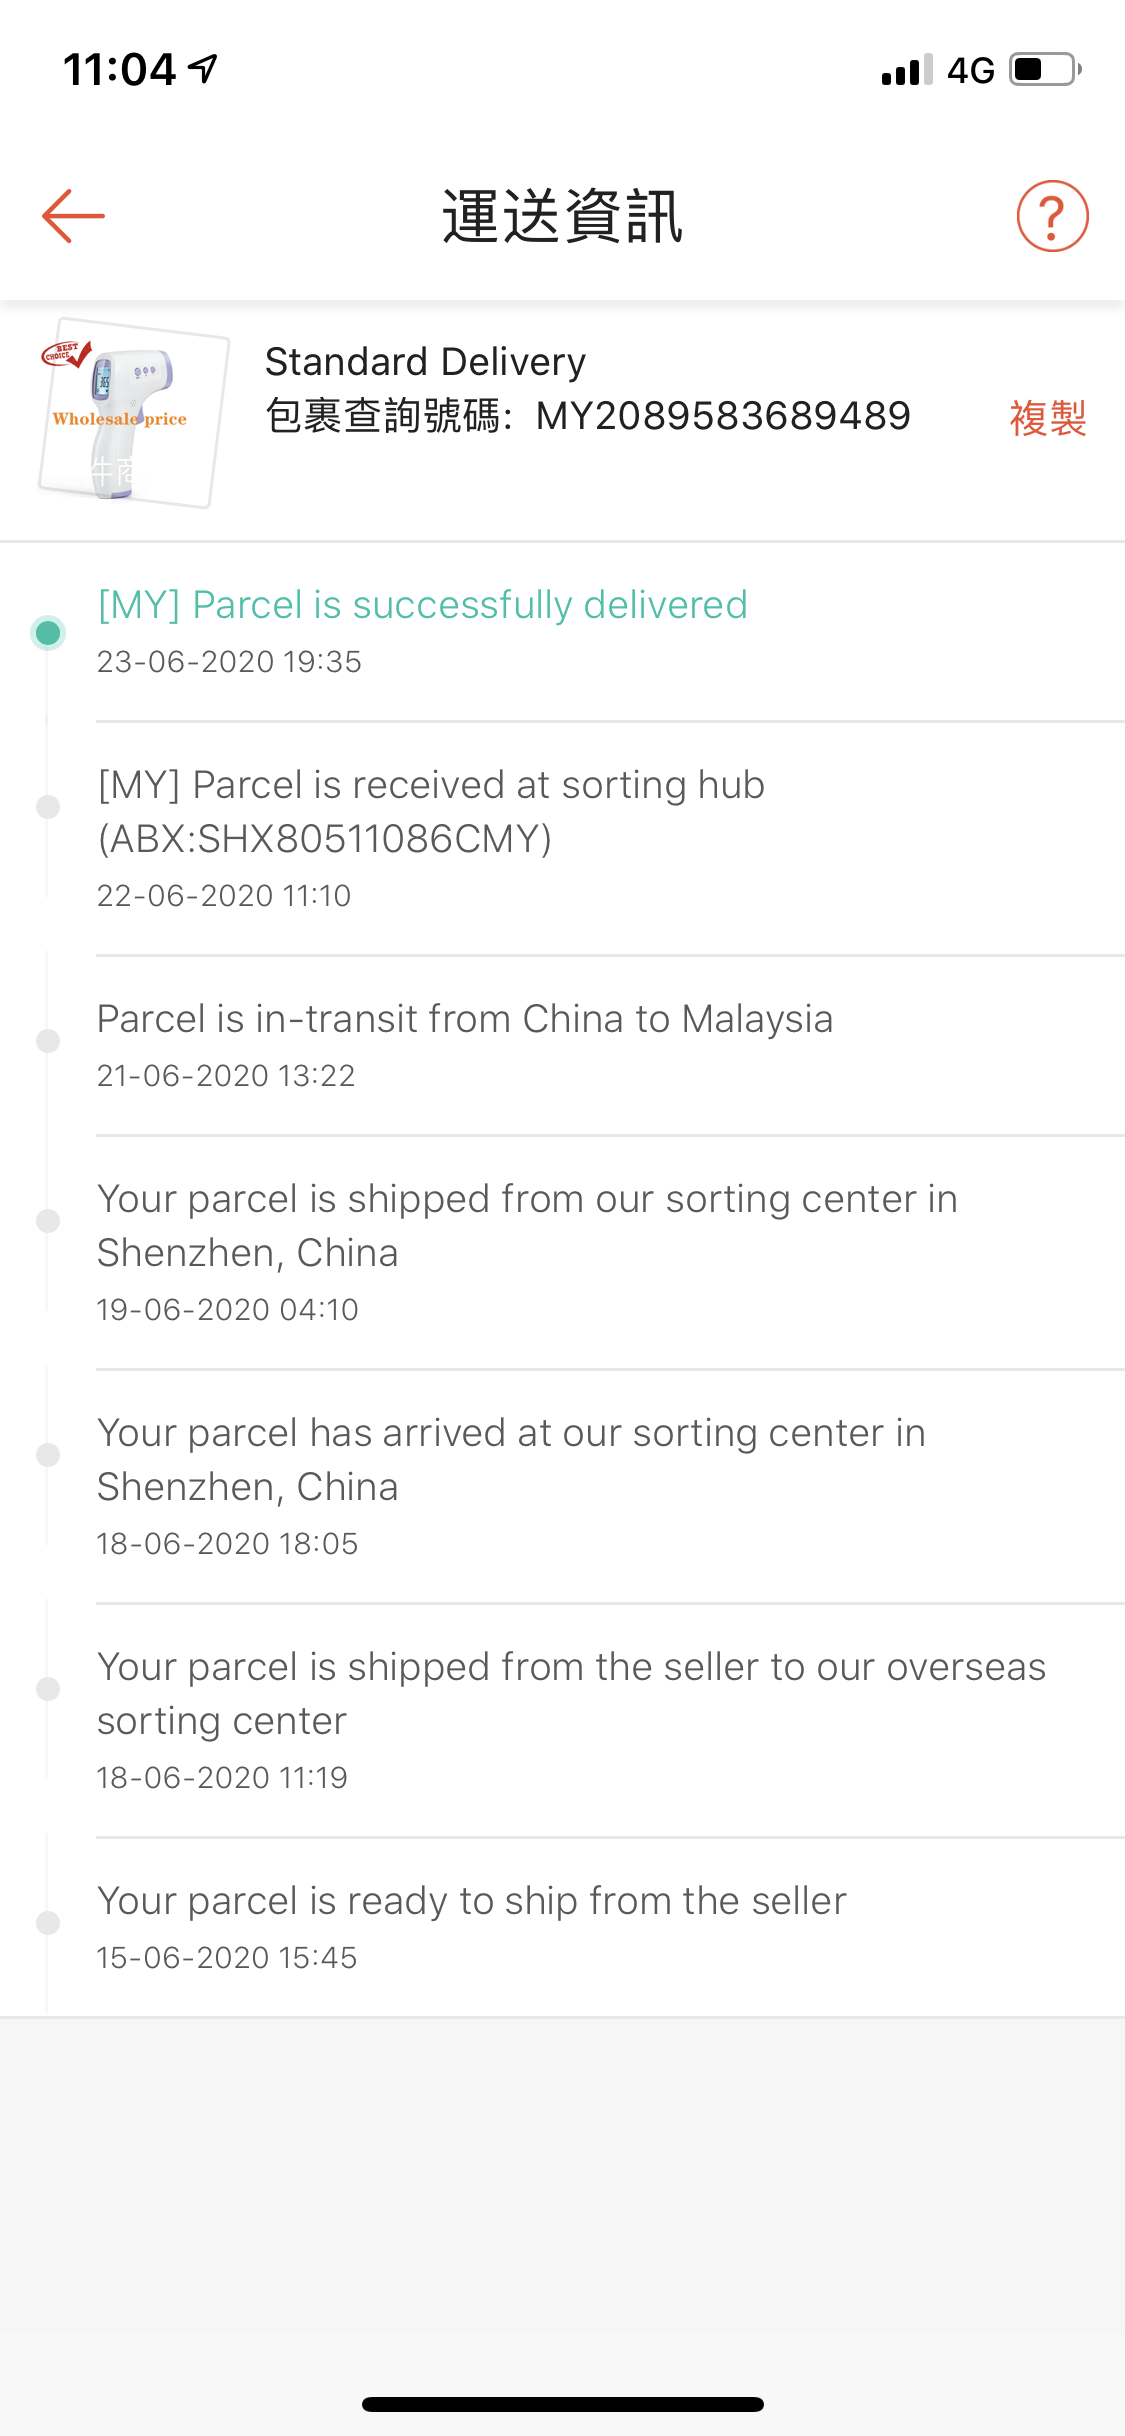 Parcel is in transit from china to malaysia